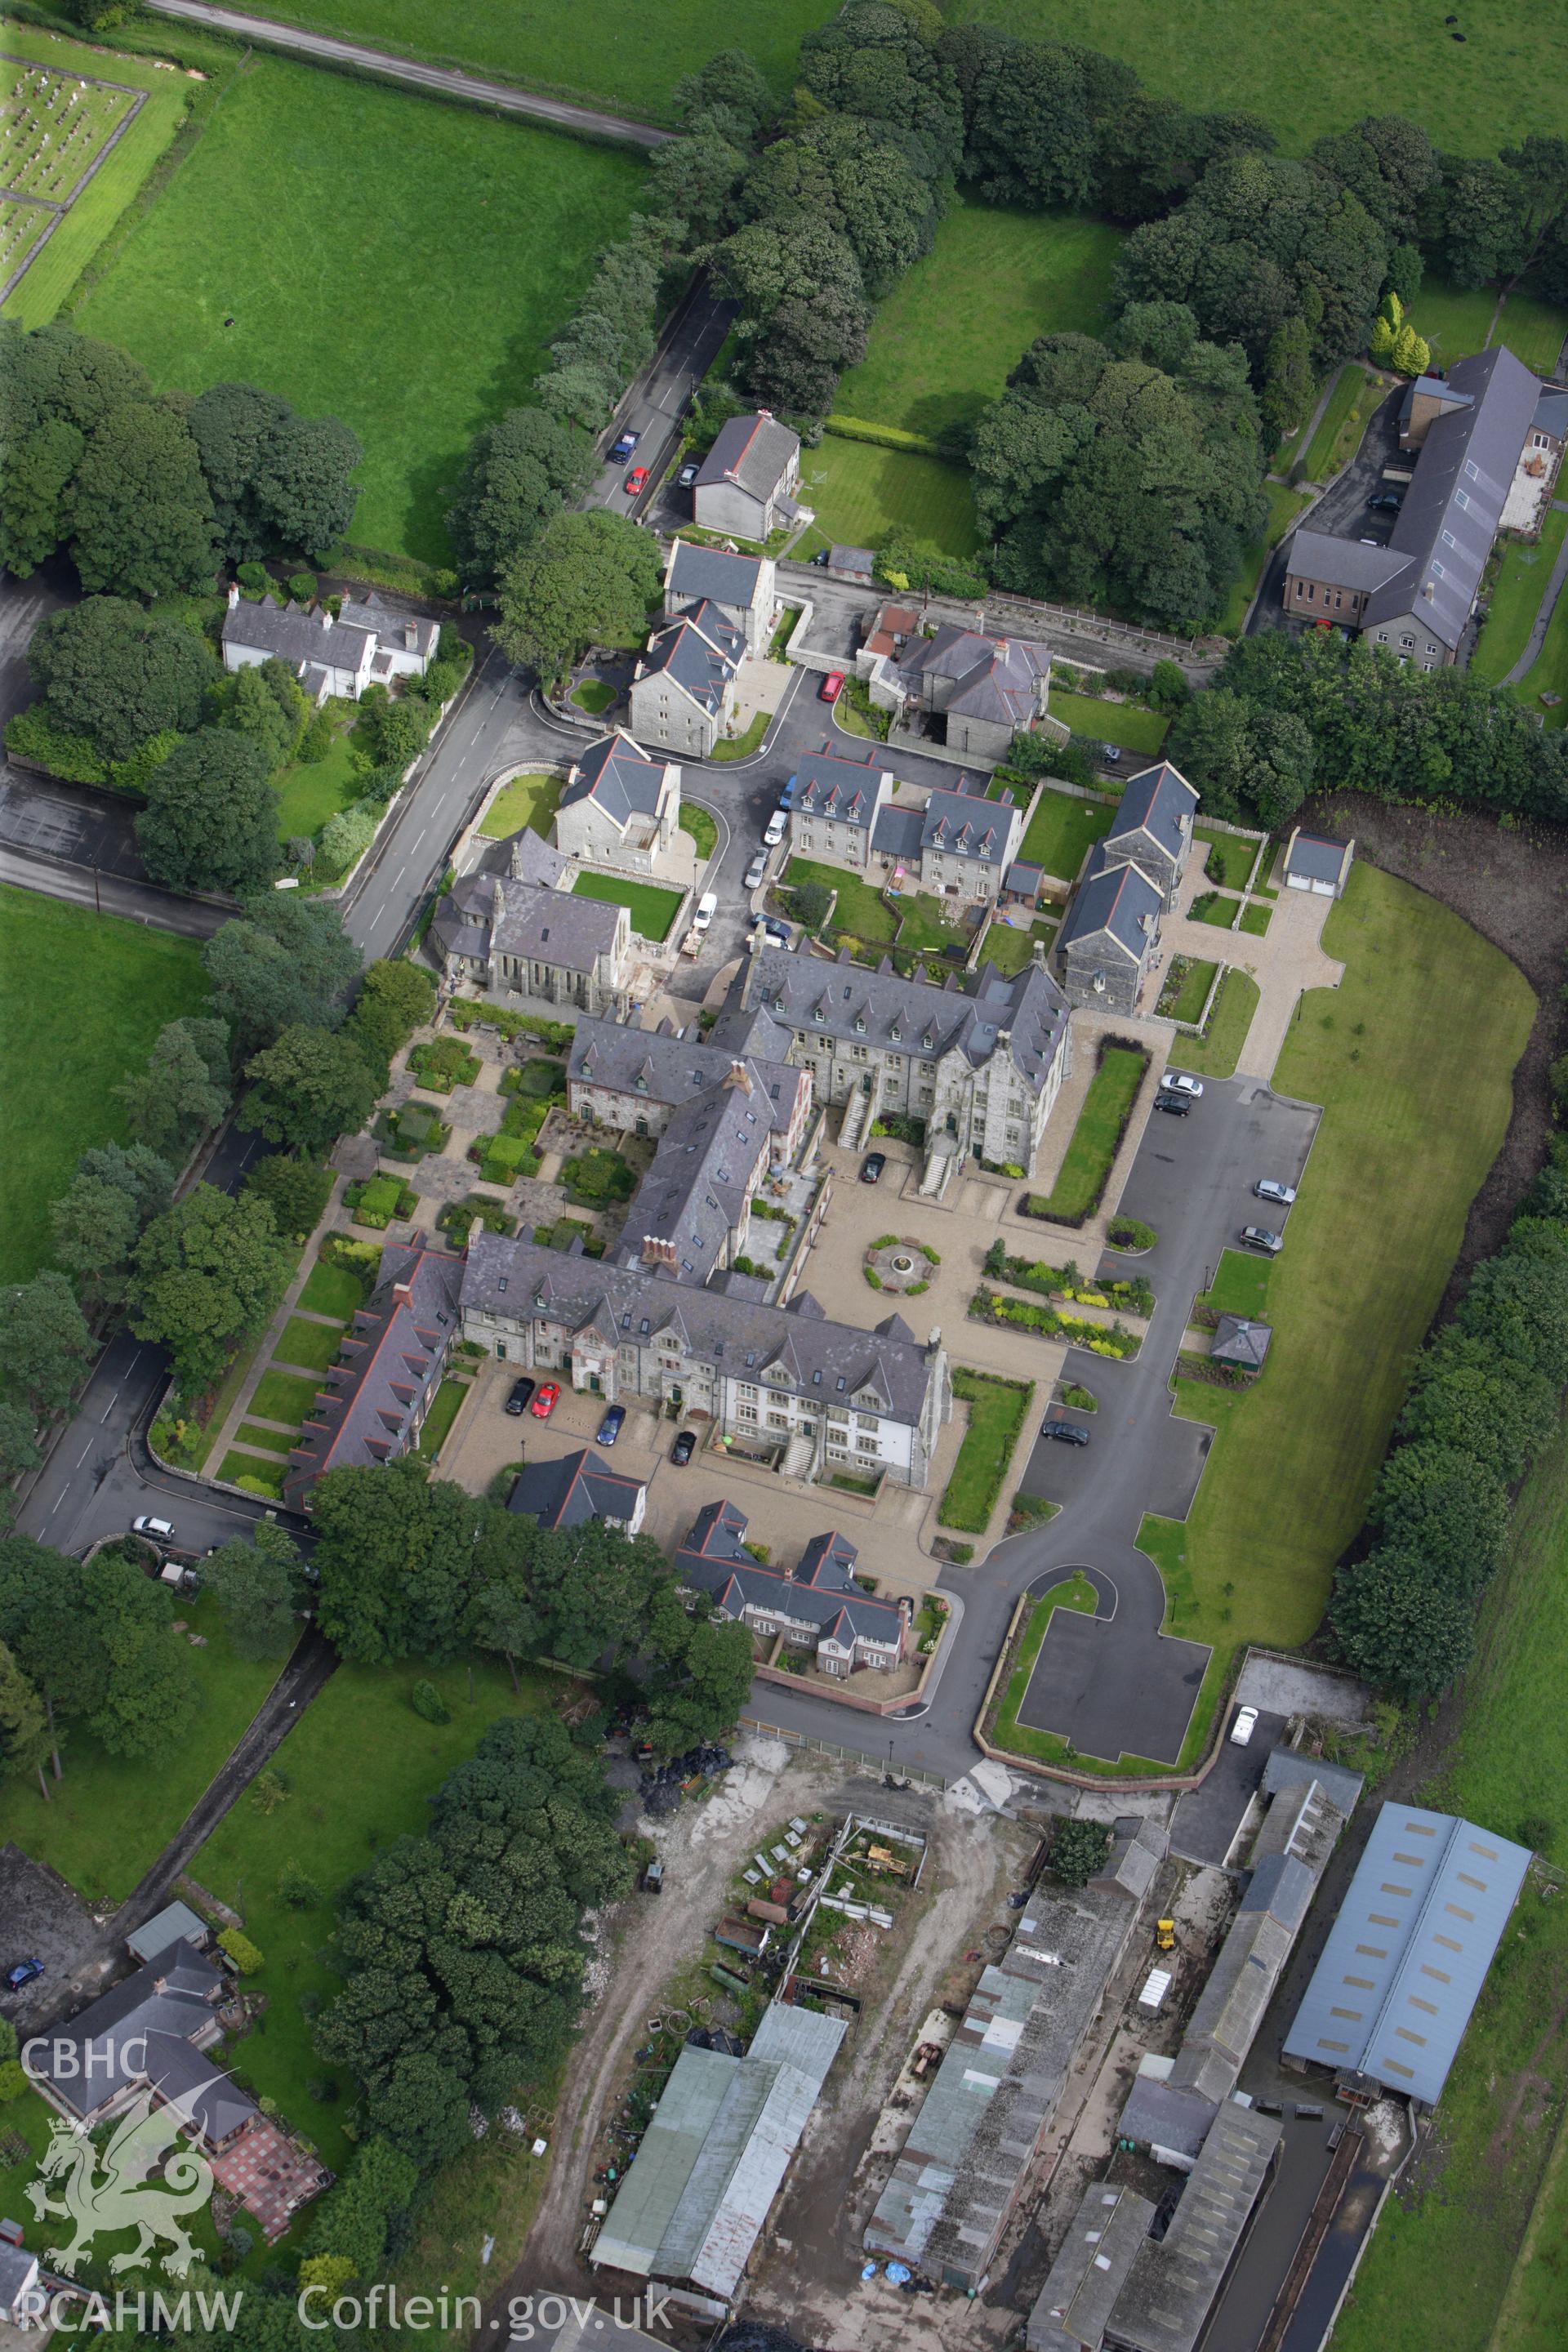 RCAHMW colour oblique aerial photograph of St Clare's Convent. Taken on 30 July 2009 by Toby Driver